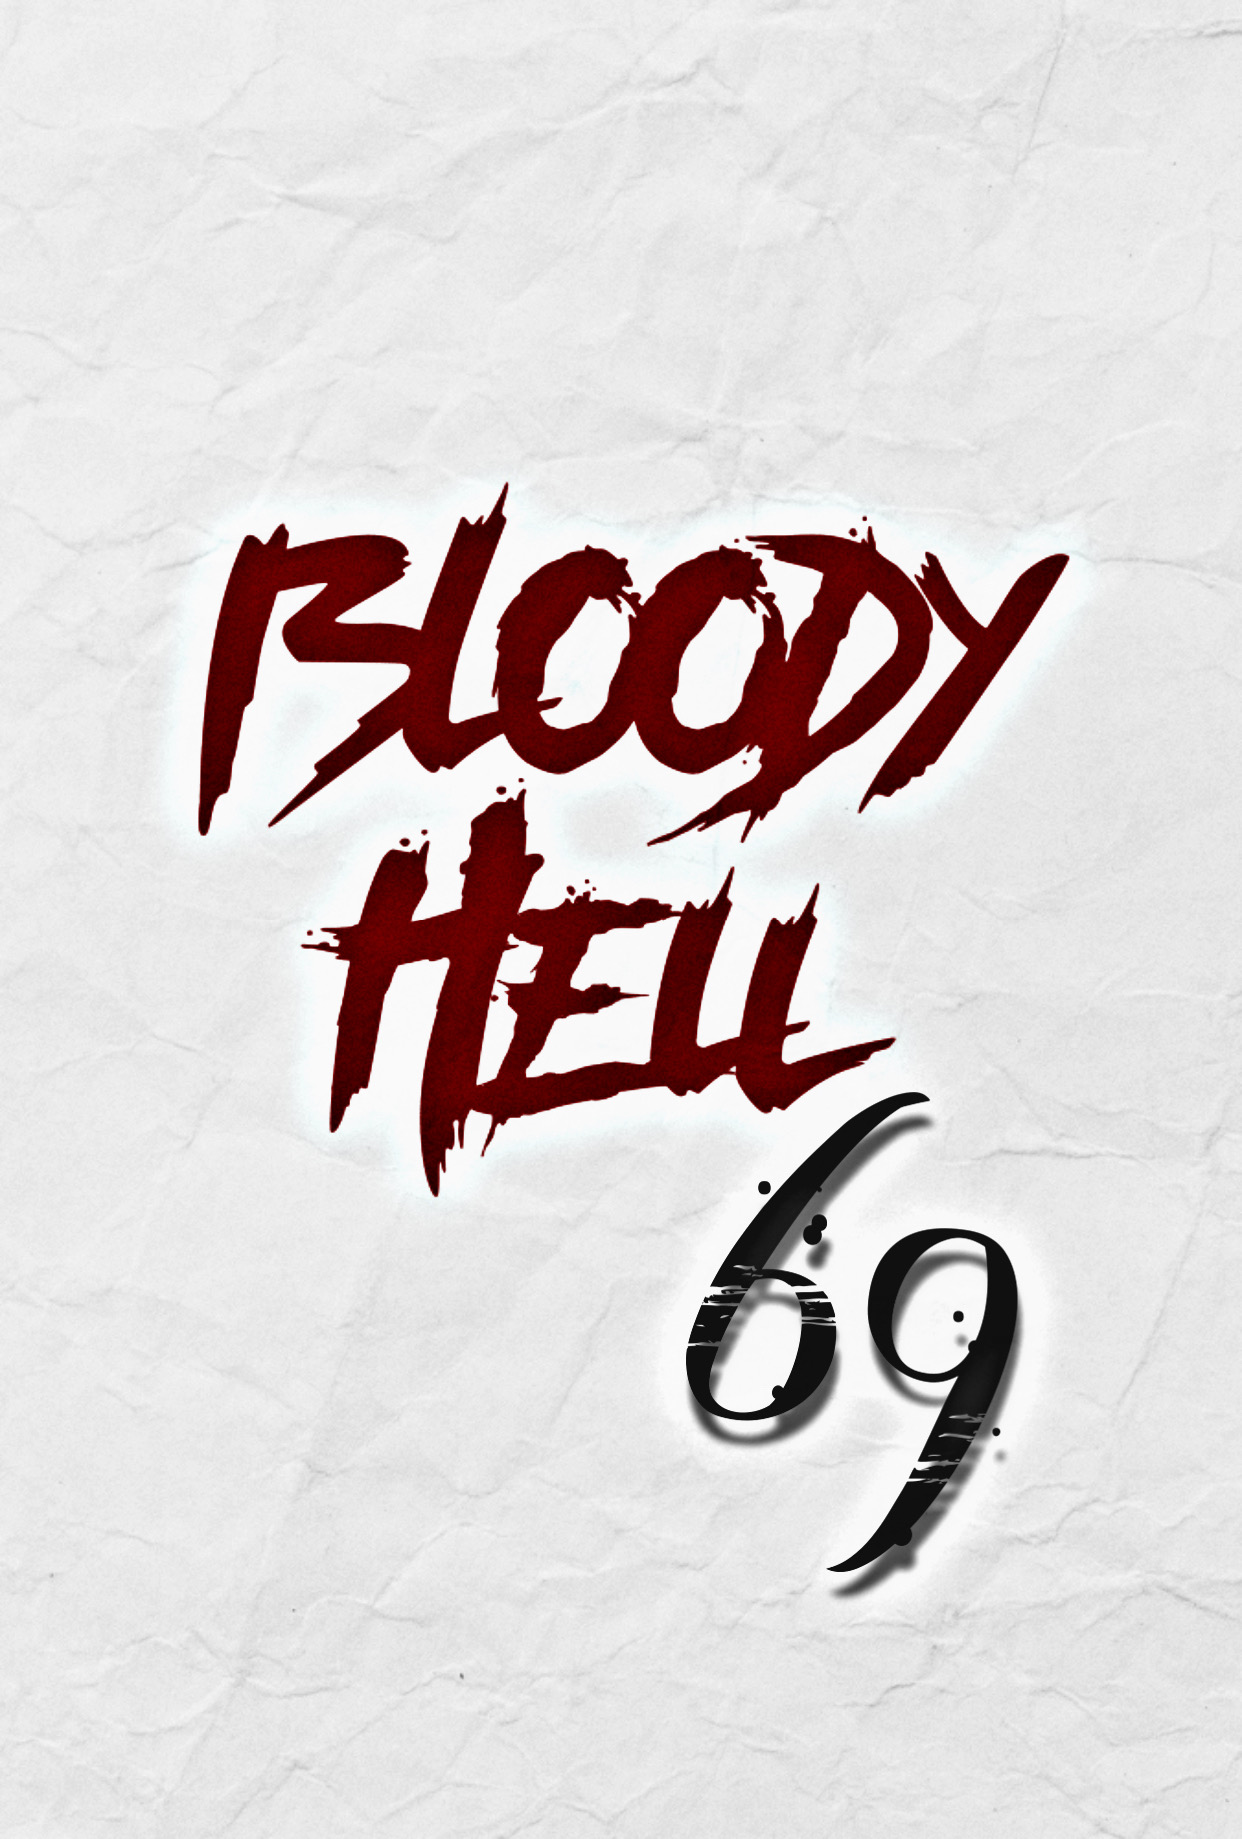 Bloodyhell69